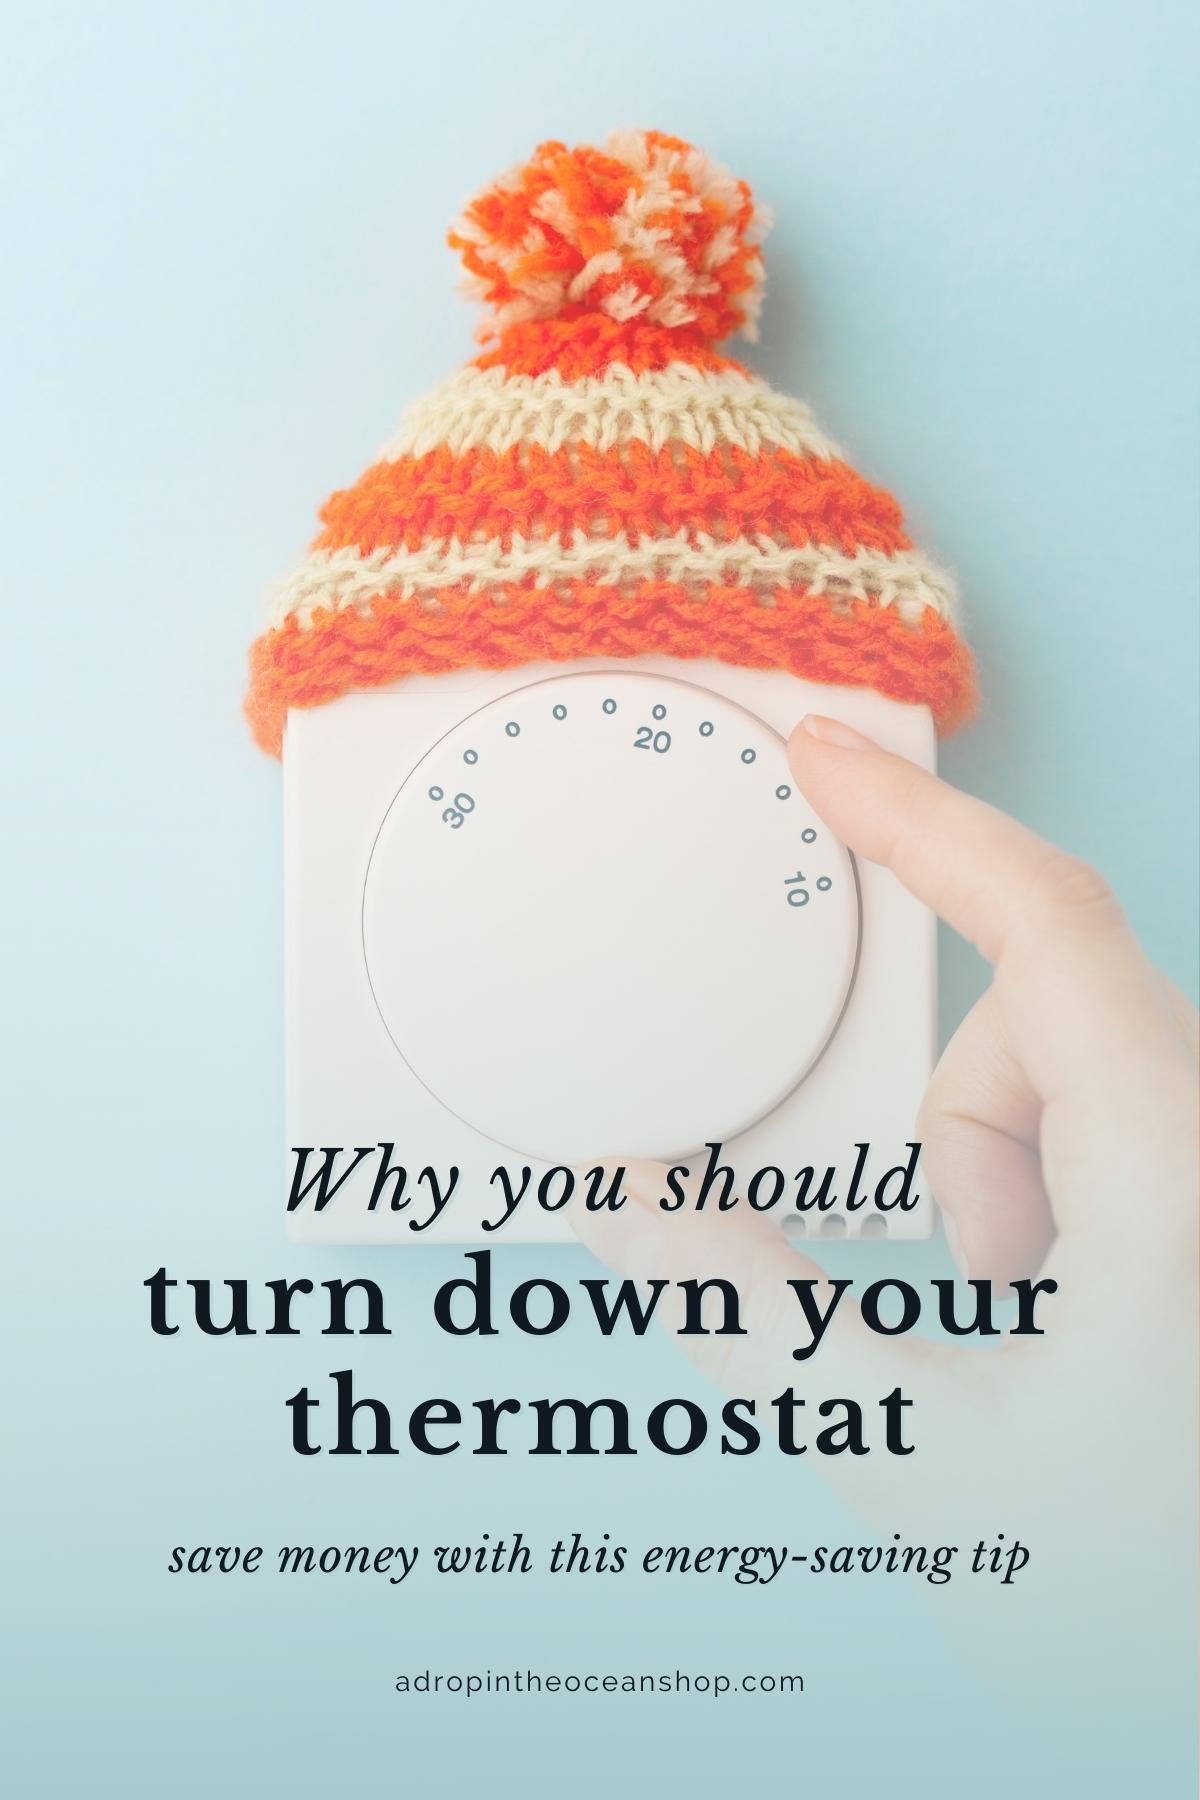 Why should you turn down your thermostat?